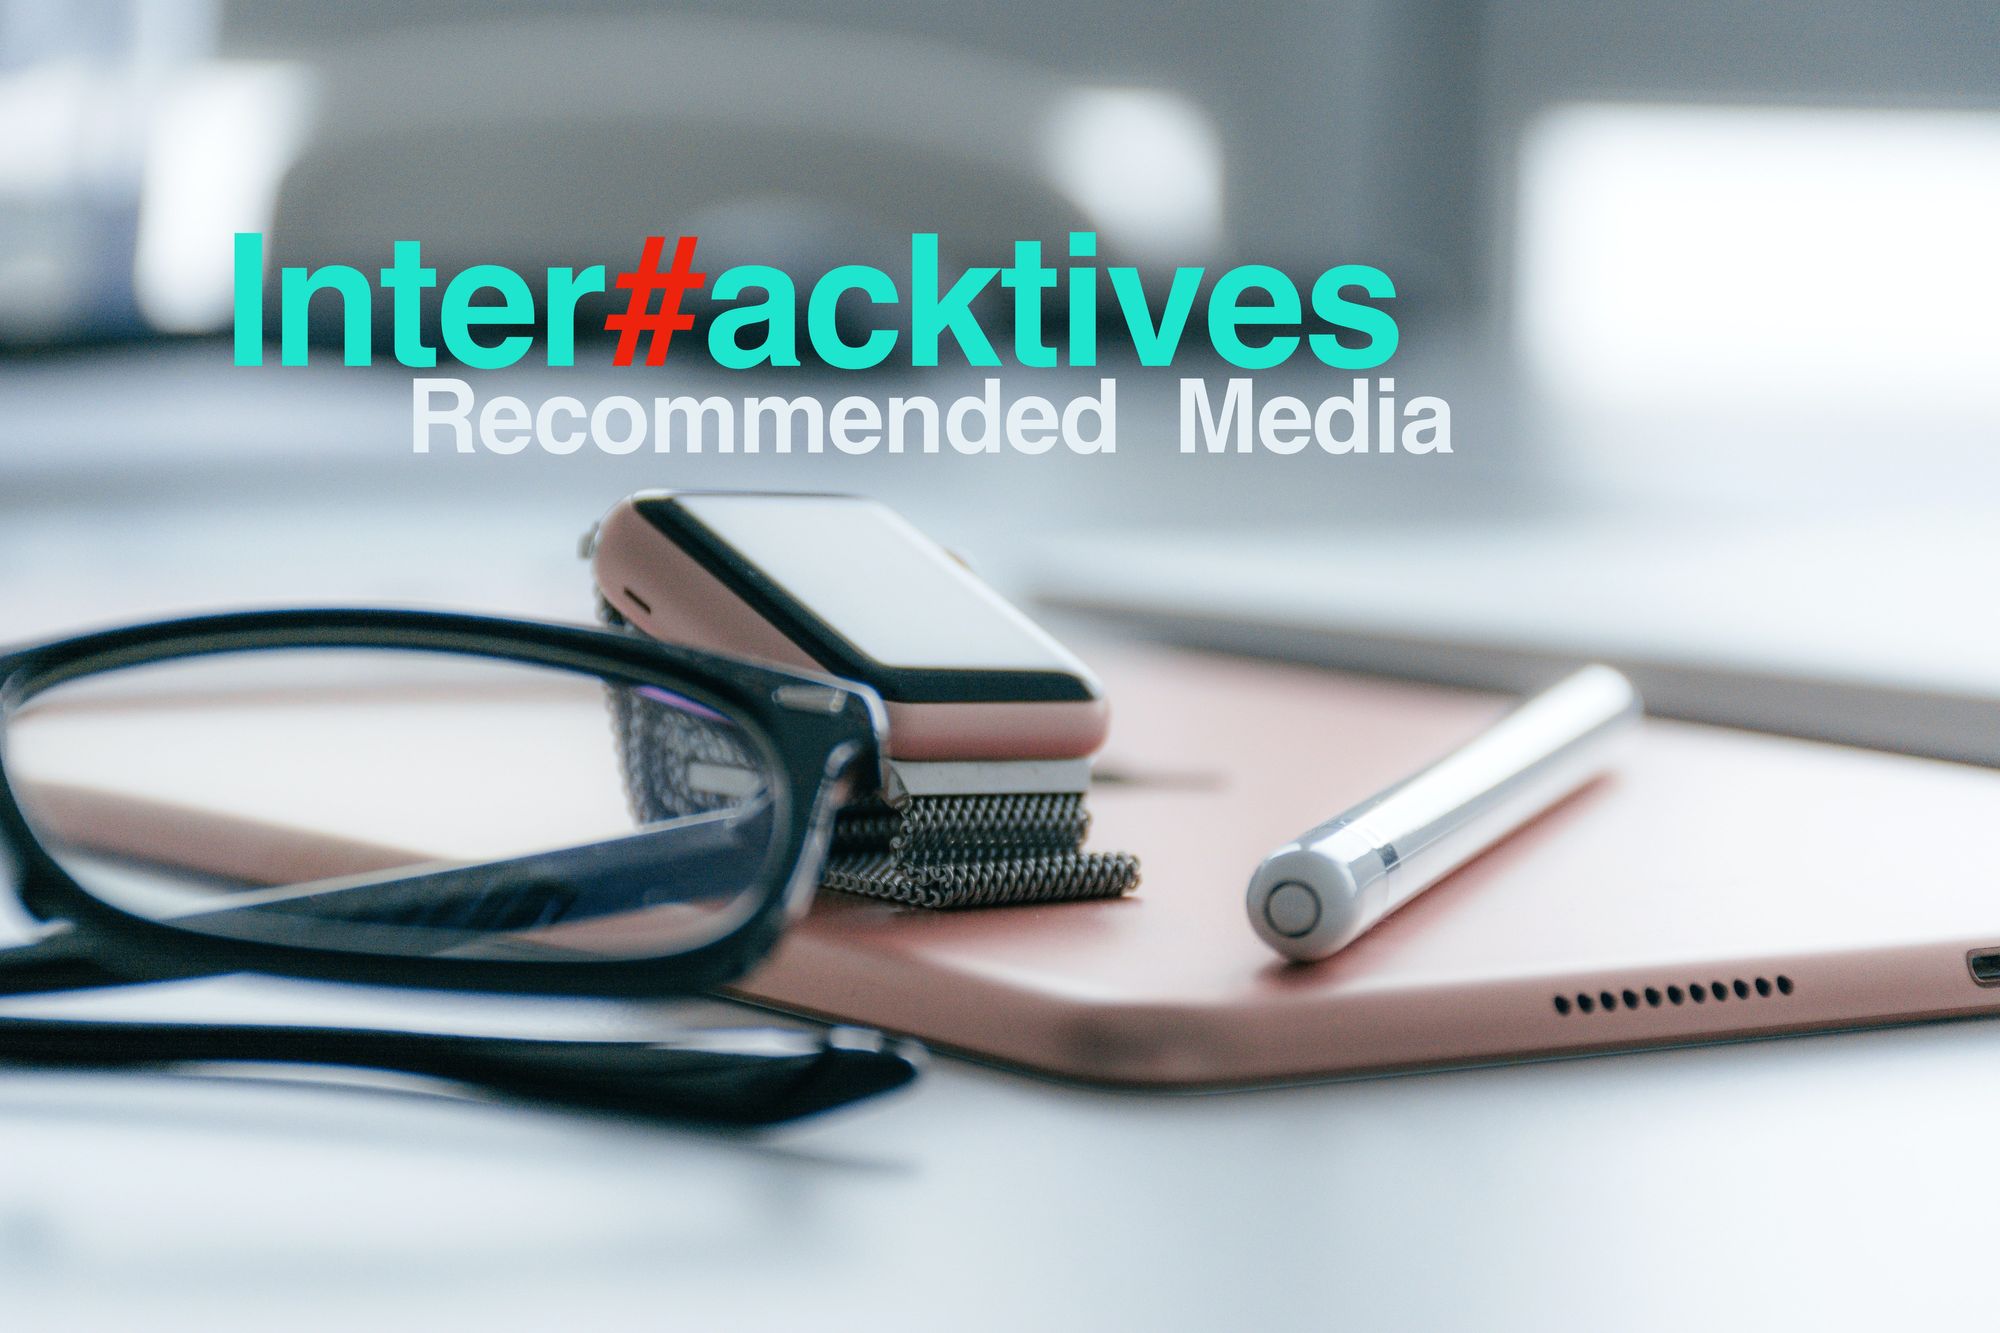 Interhacktives: recommended reads